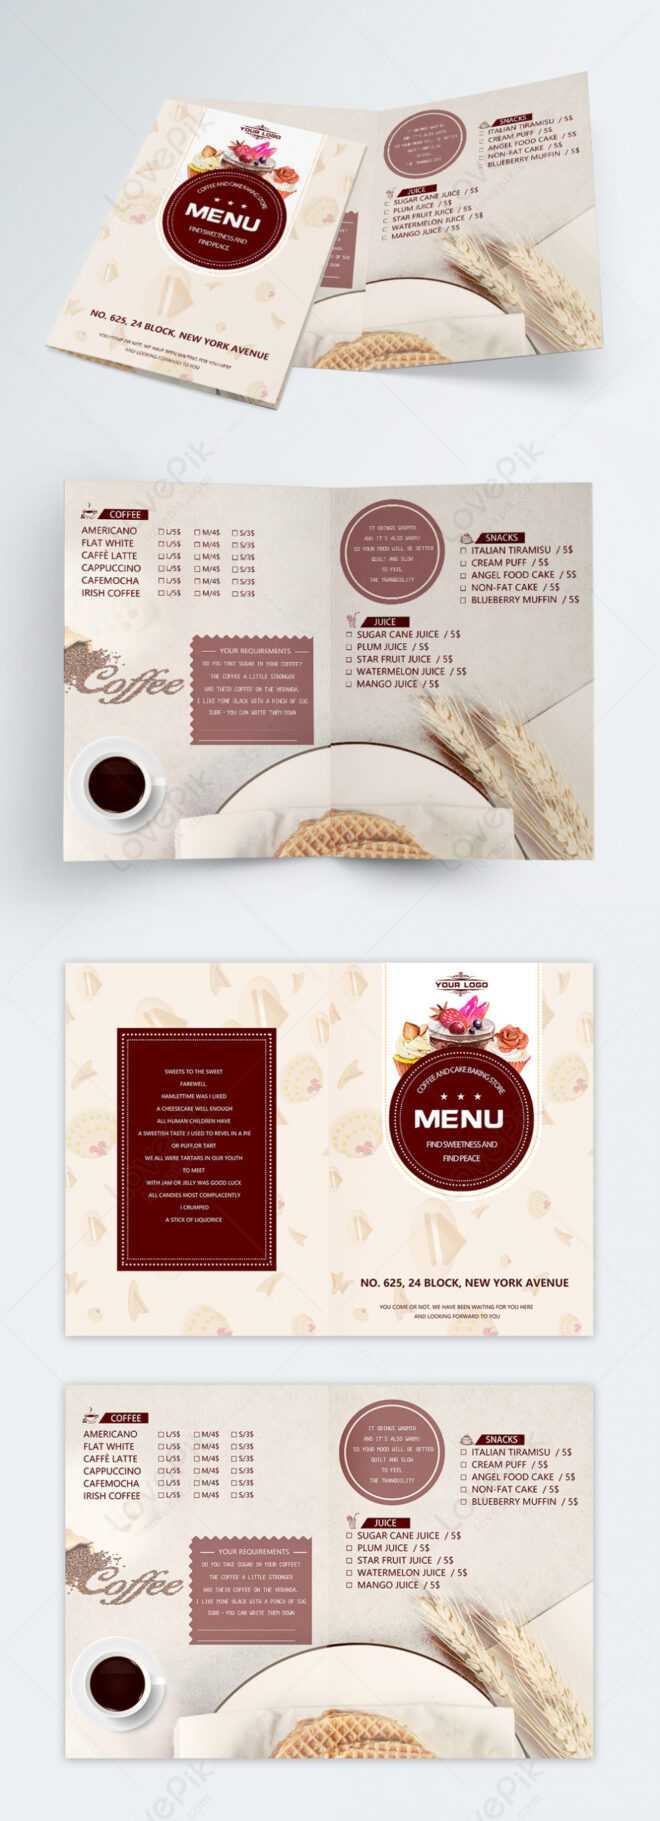 Menu Template Template Image_Picture Free Download with Product Menu Template